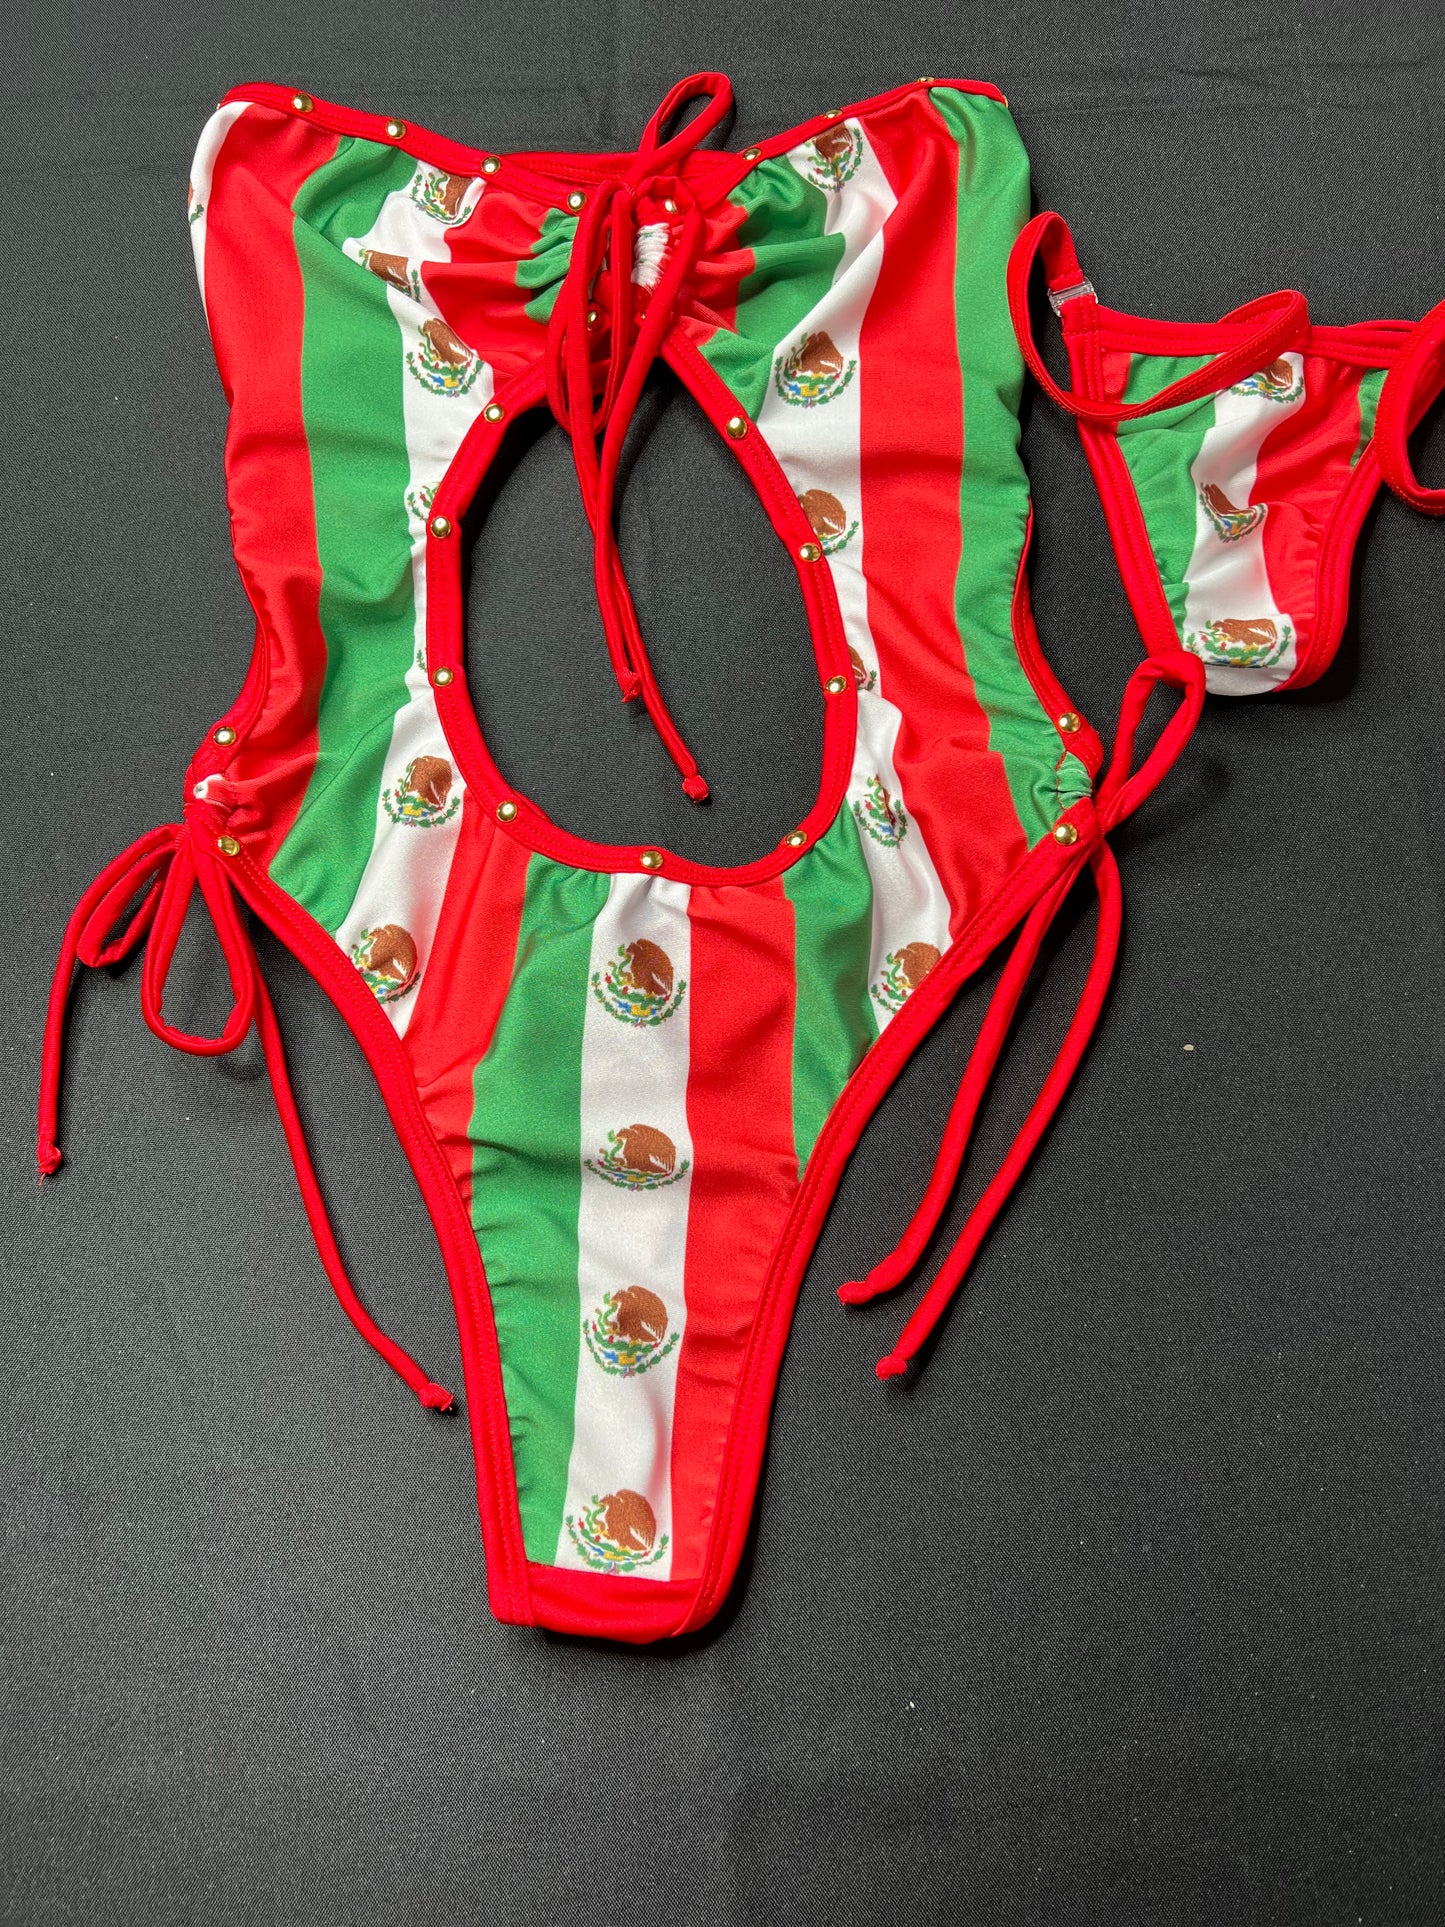 Mexico/Cinco de Mayo inspired One-Piece Exotic Dancer Outfit